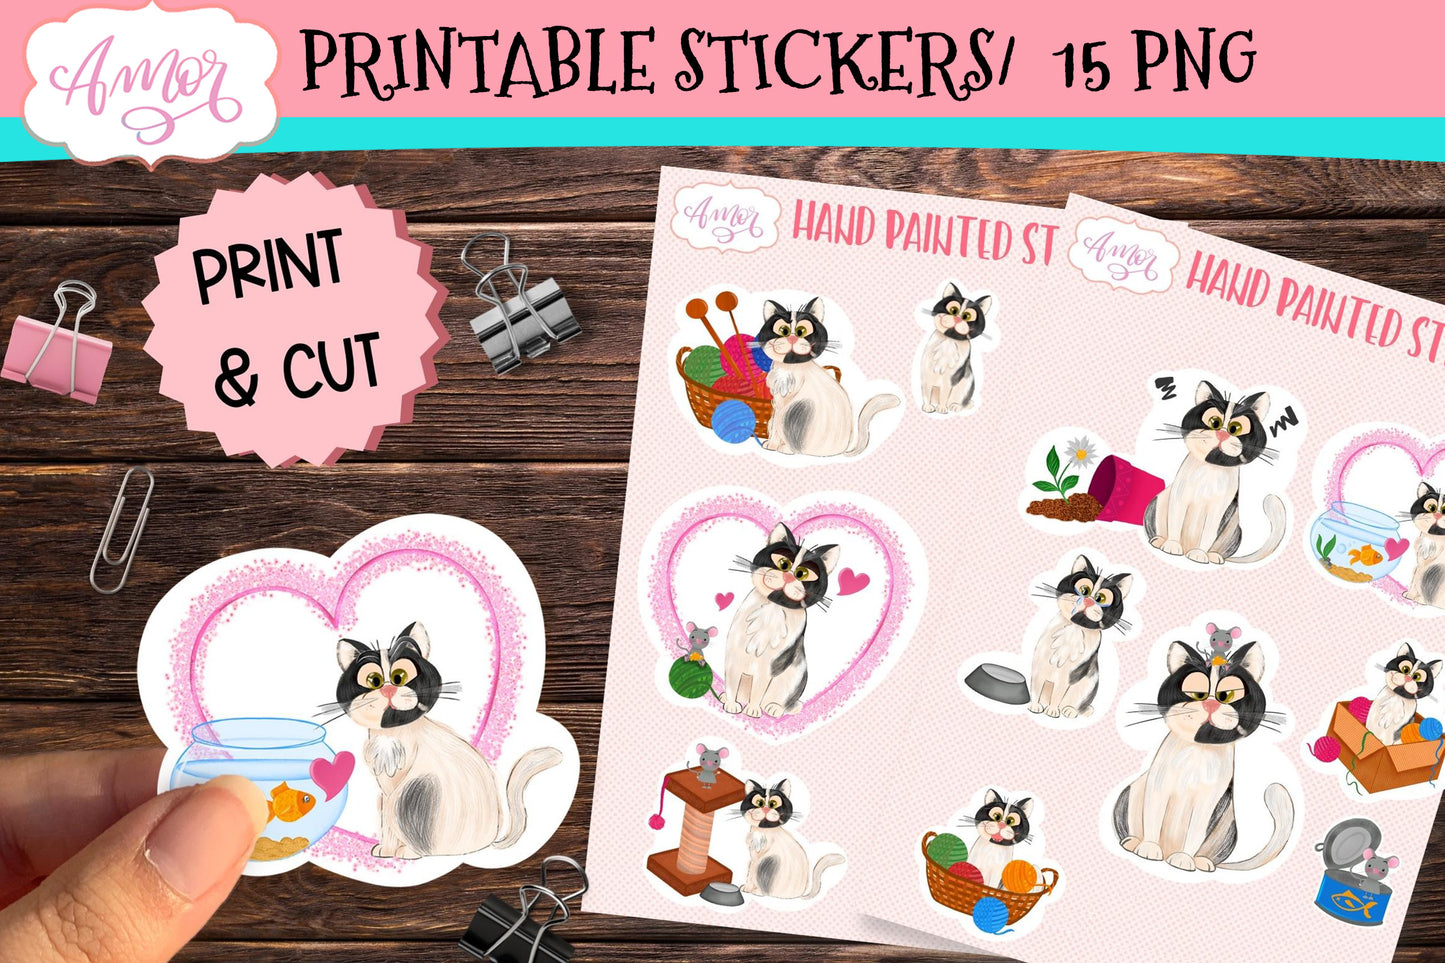 Cute cat stickers for print & cut | Printable PNG stickers